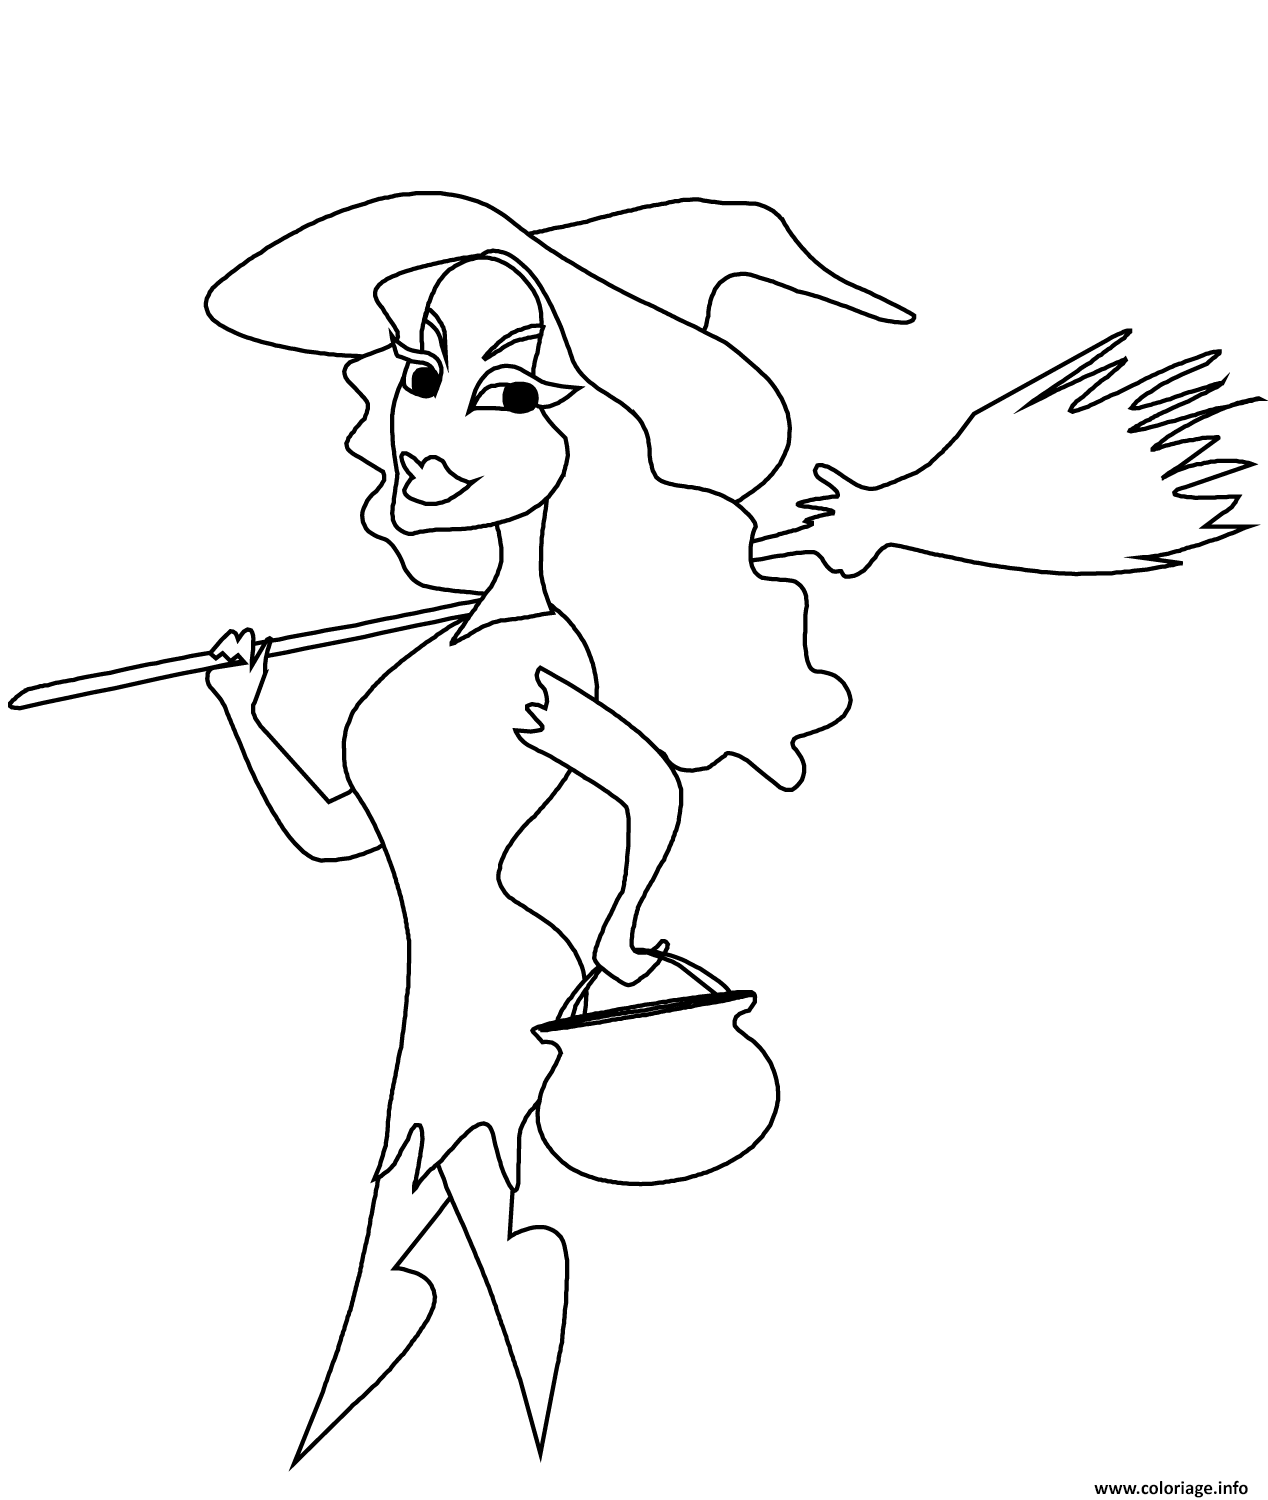 Coloriage Witch With Broomstick And Cauldron Halloween Dessin à Imprimer